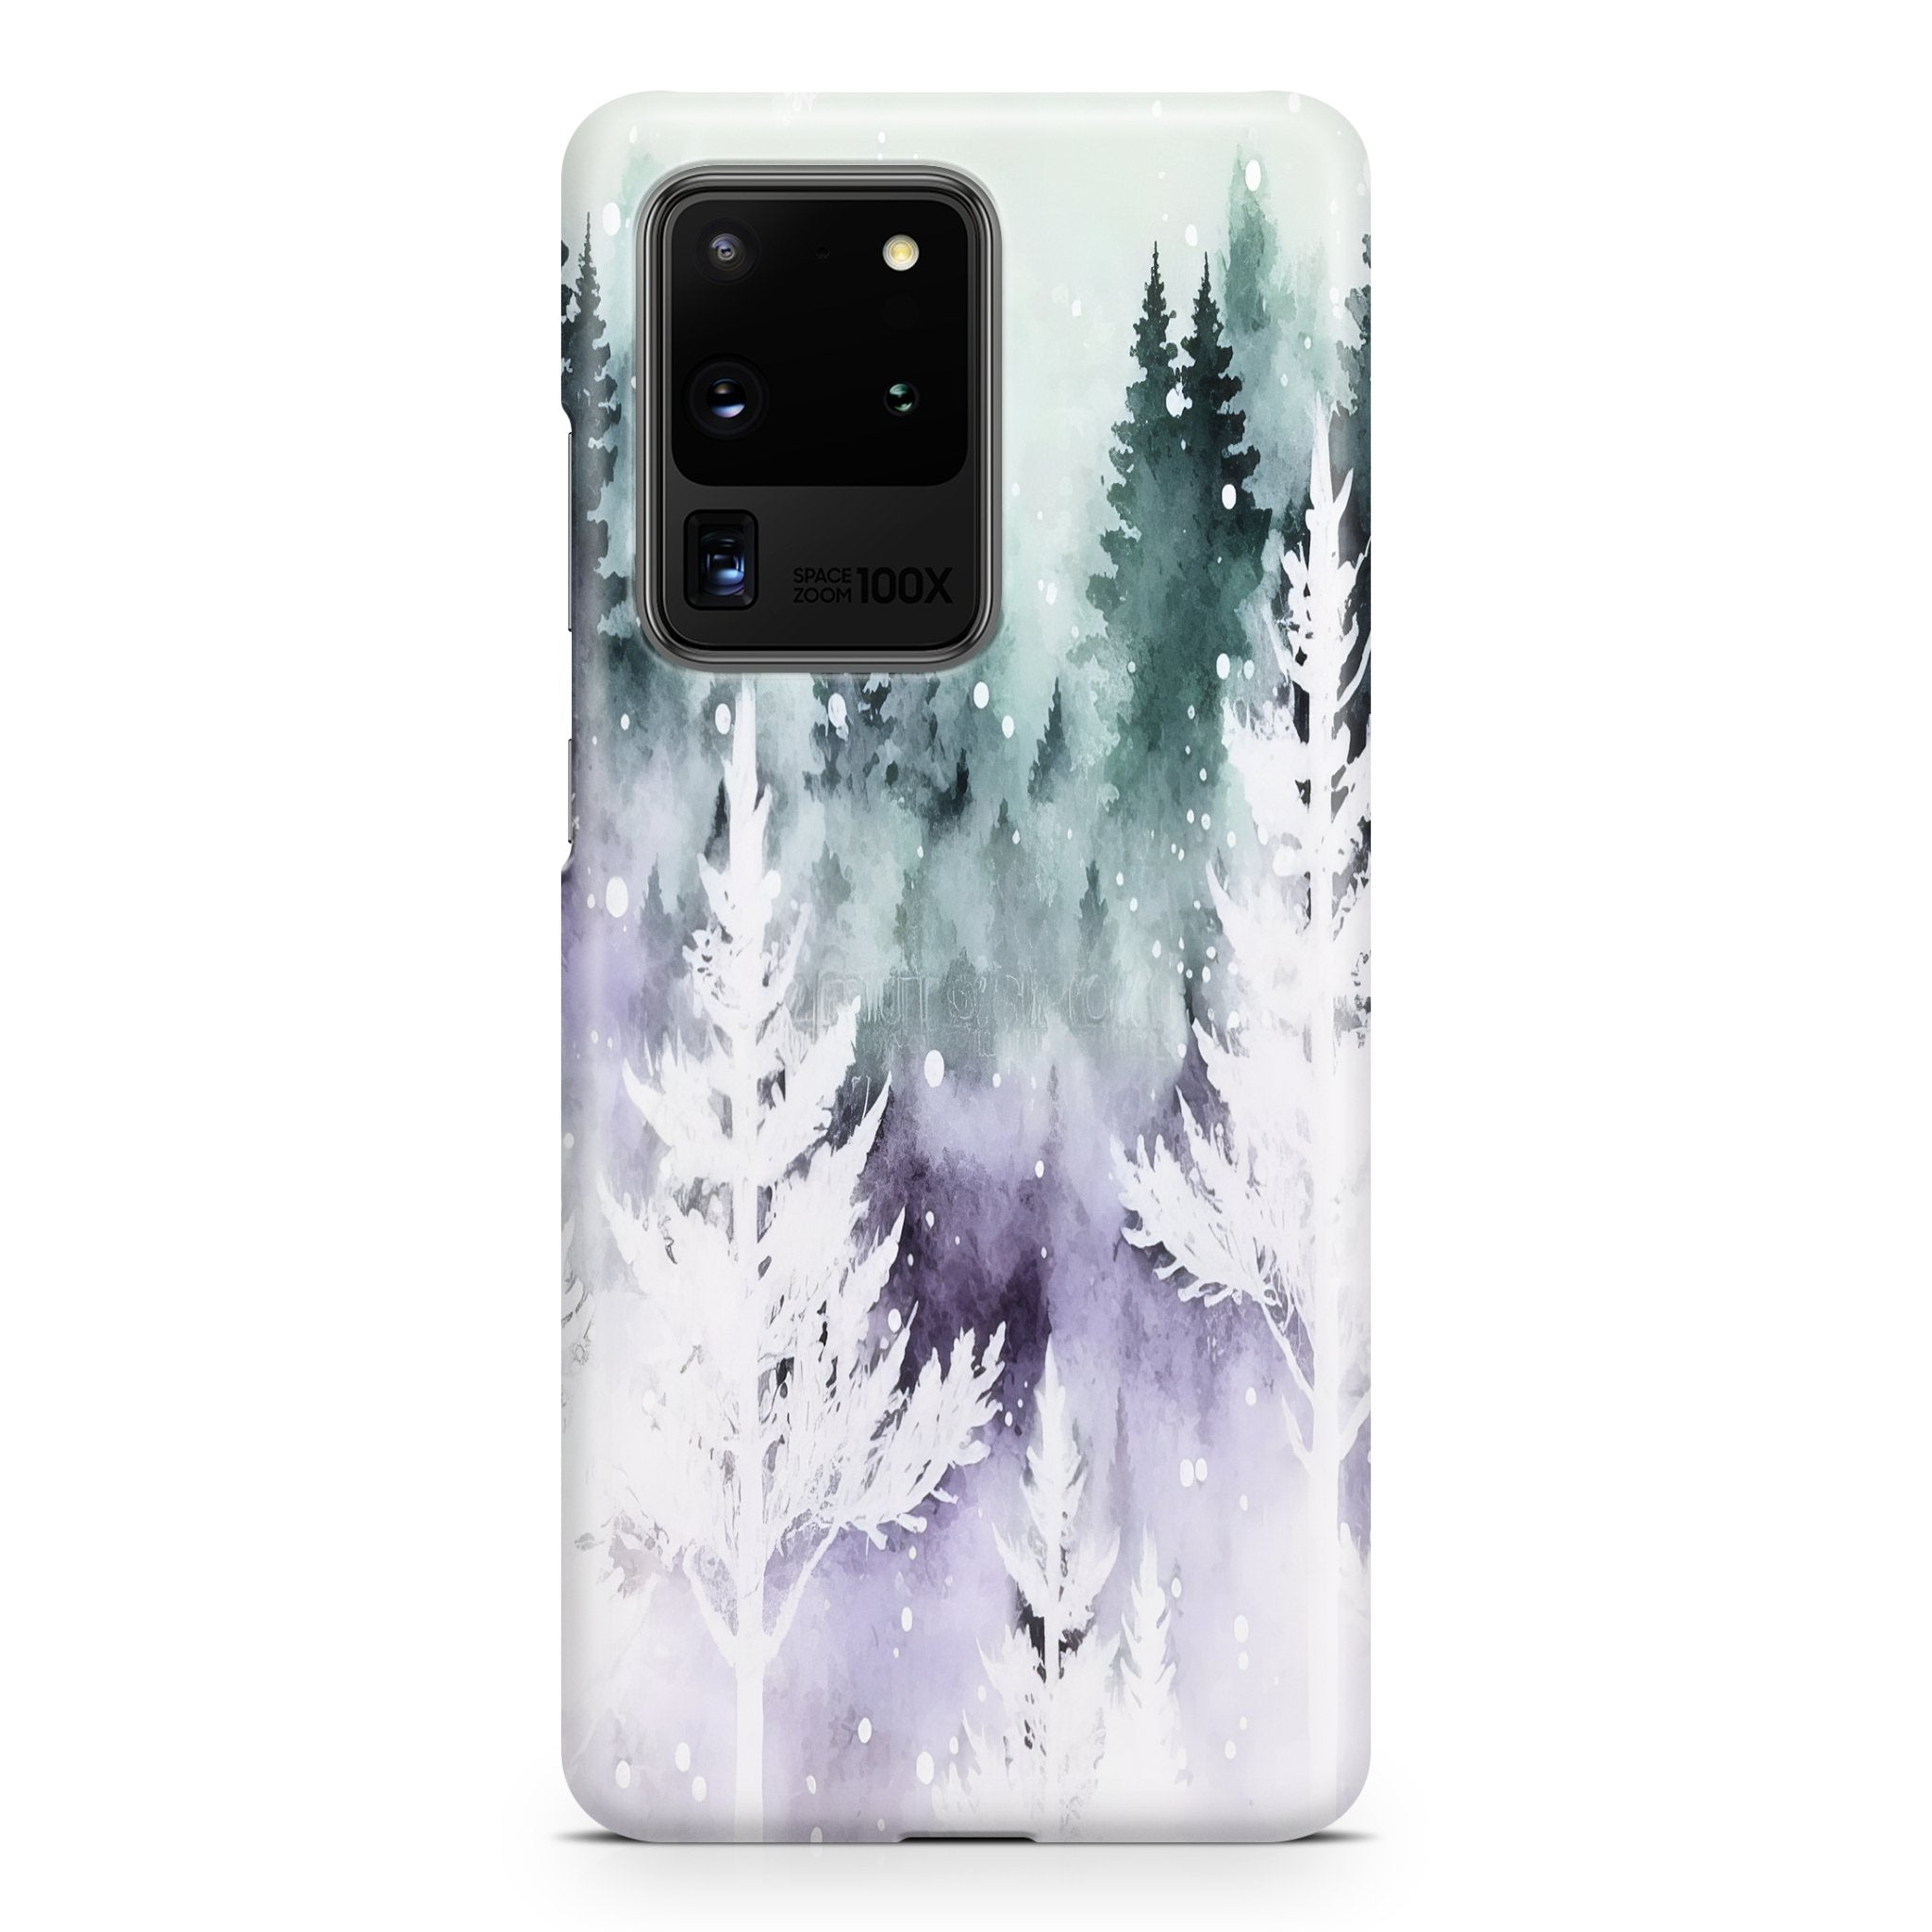 Cloudy Forest - Samsung phone case designs by CaseSwagger